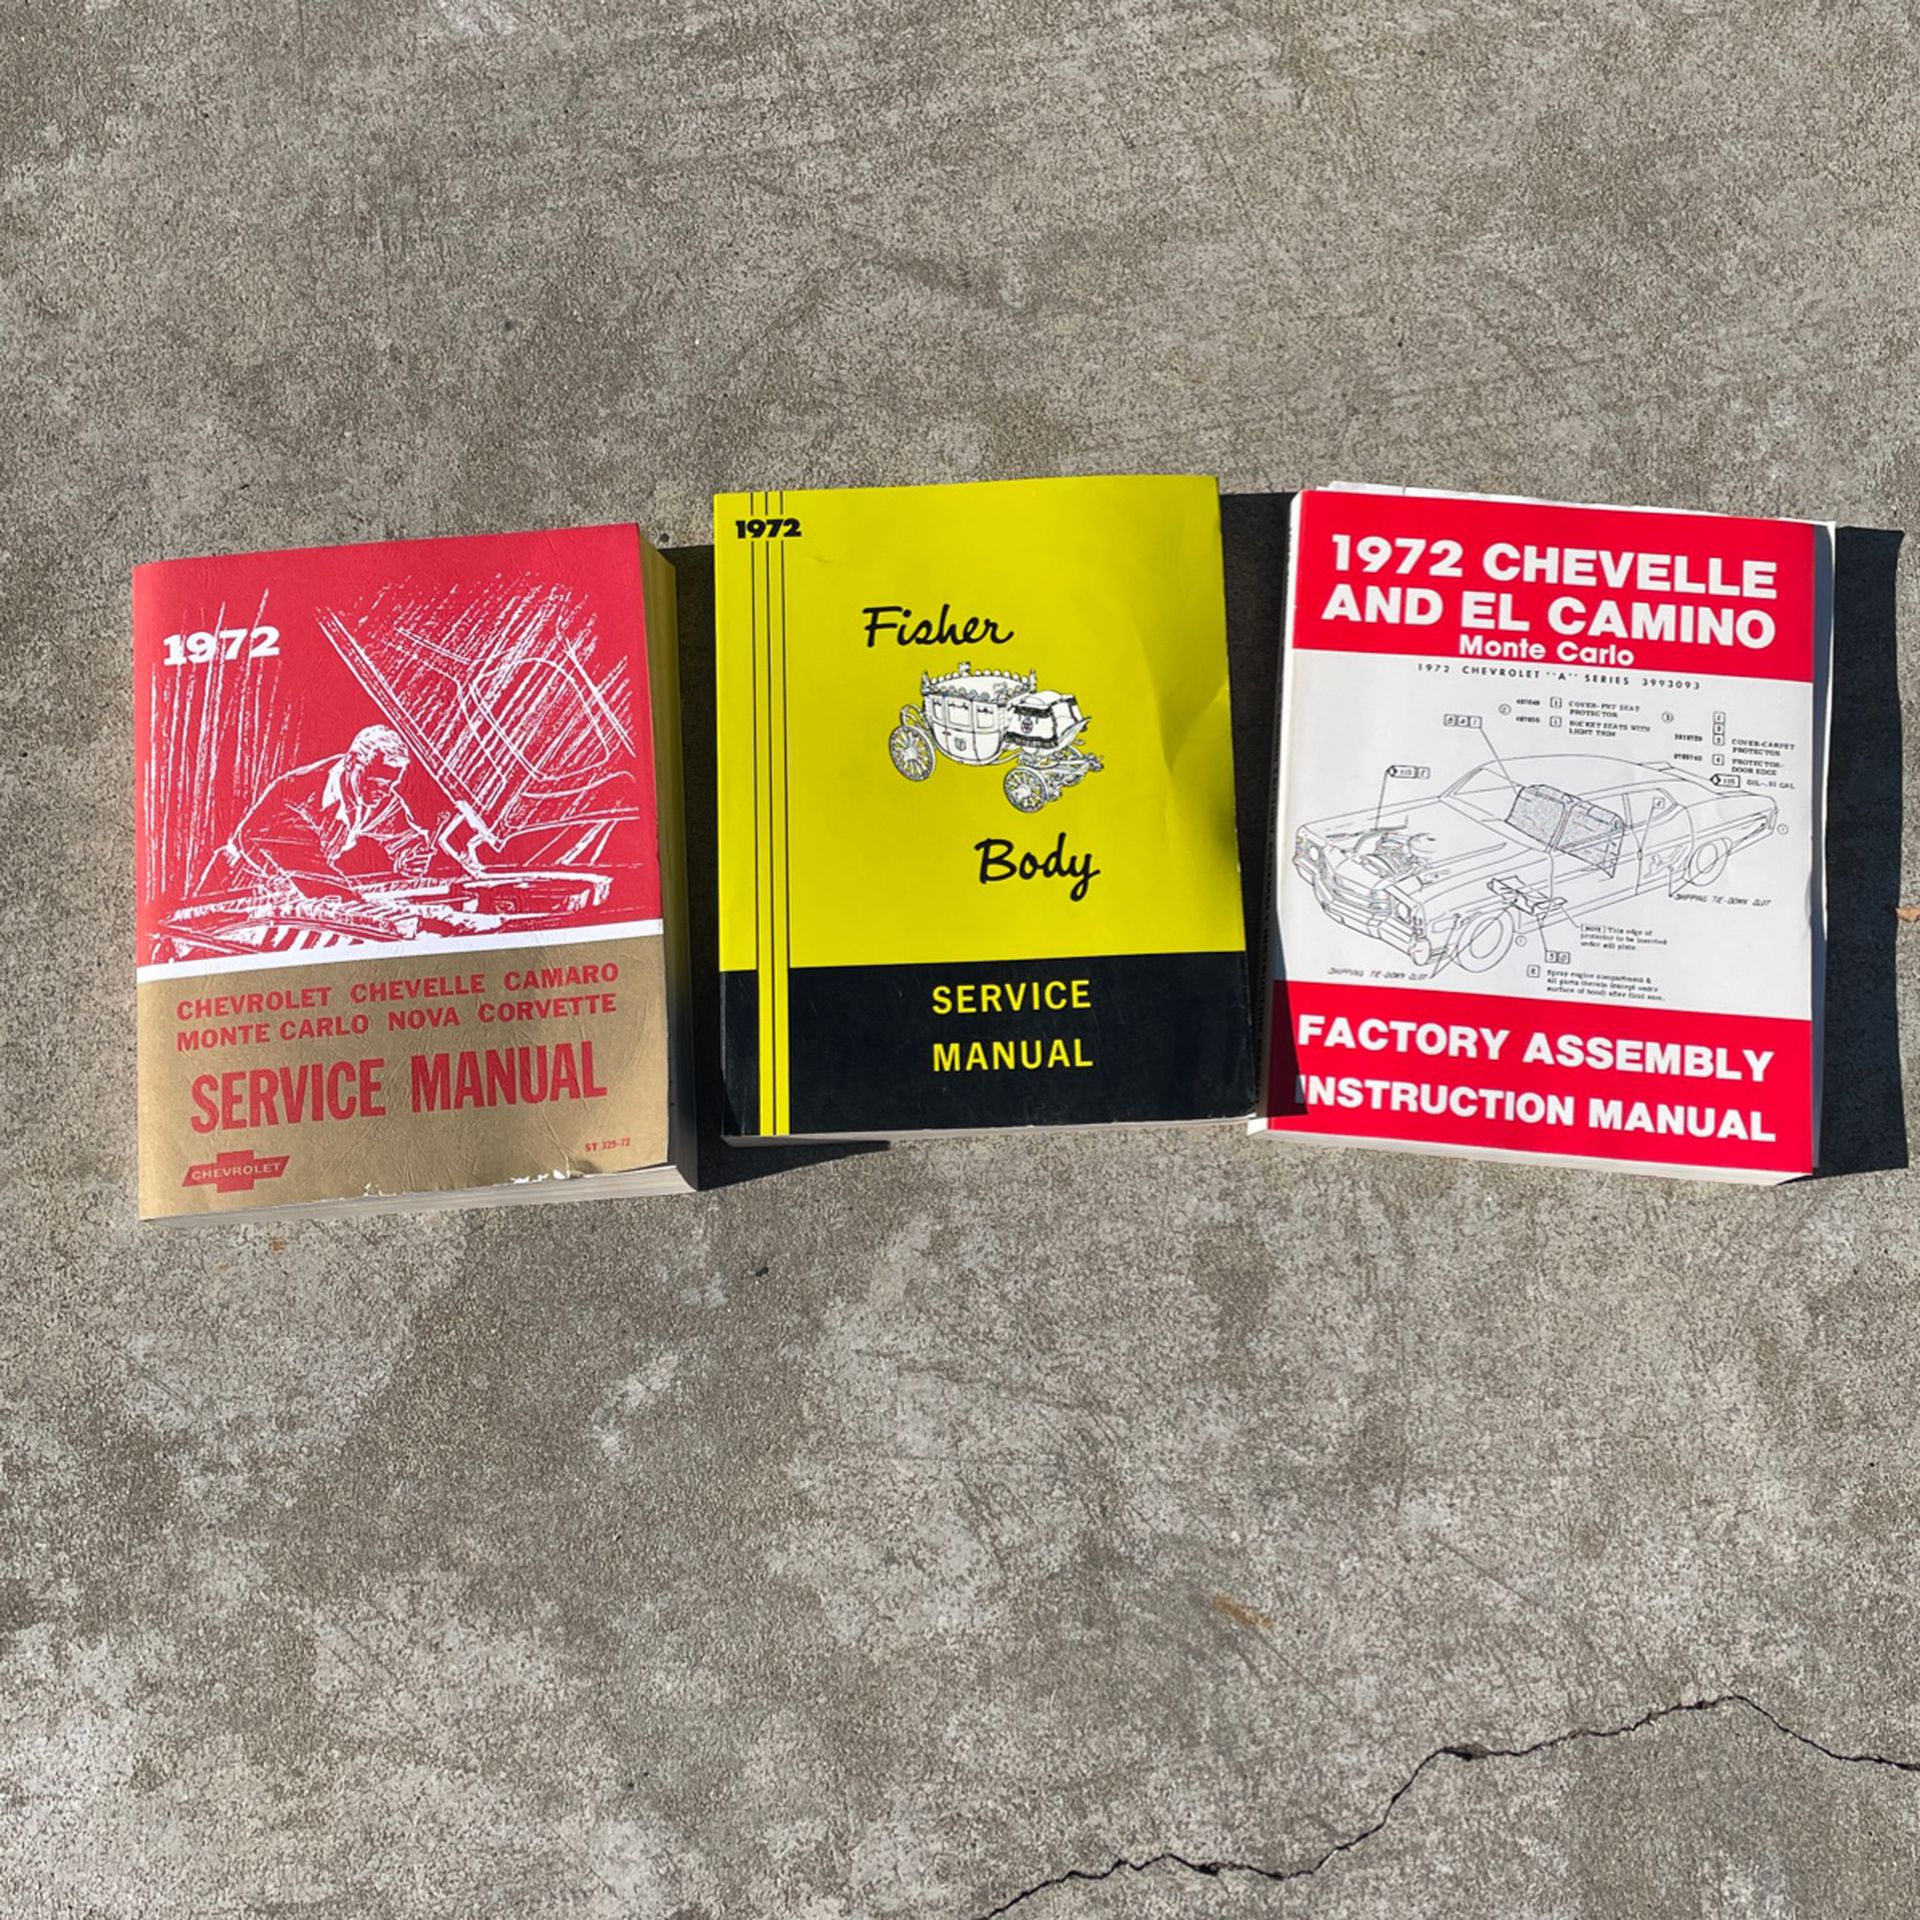 1972 Chevy Service Manuals